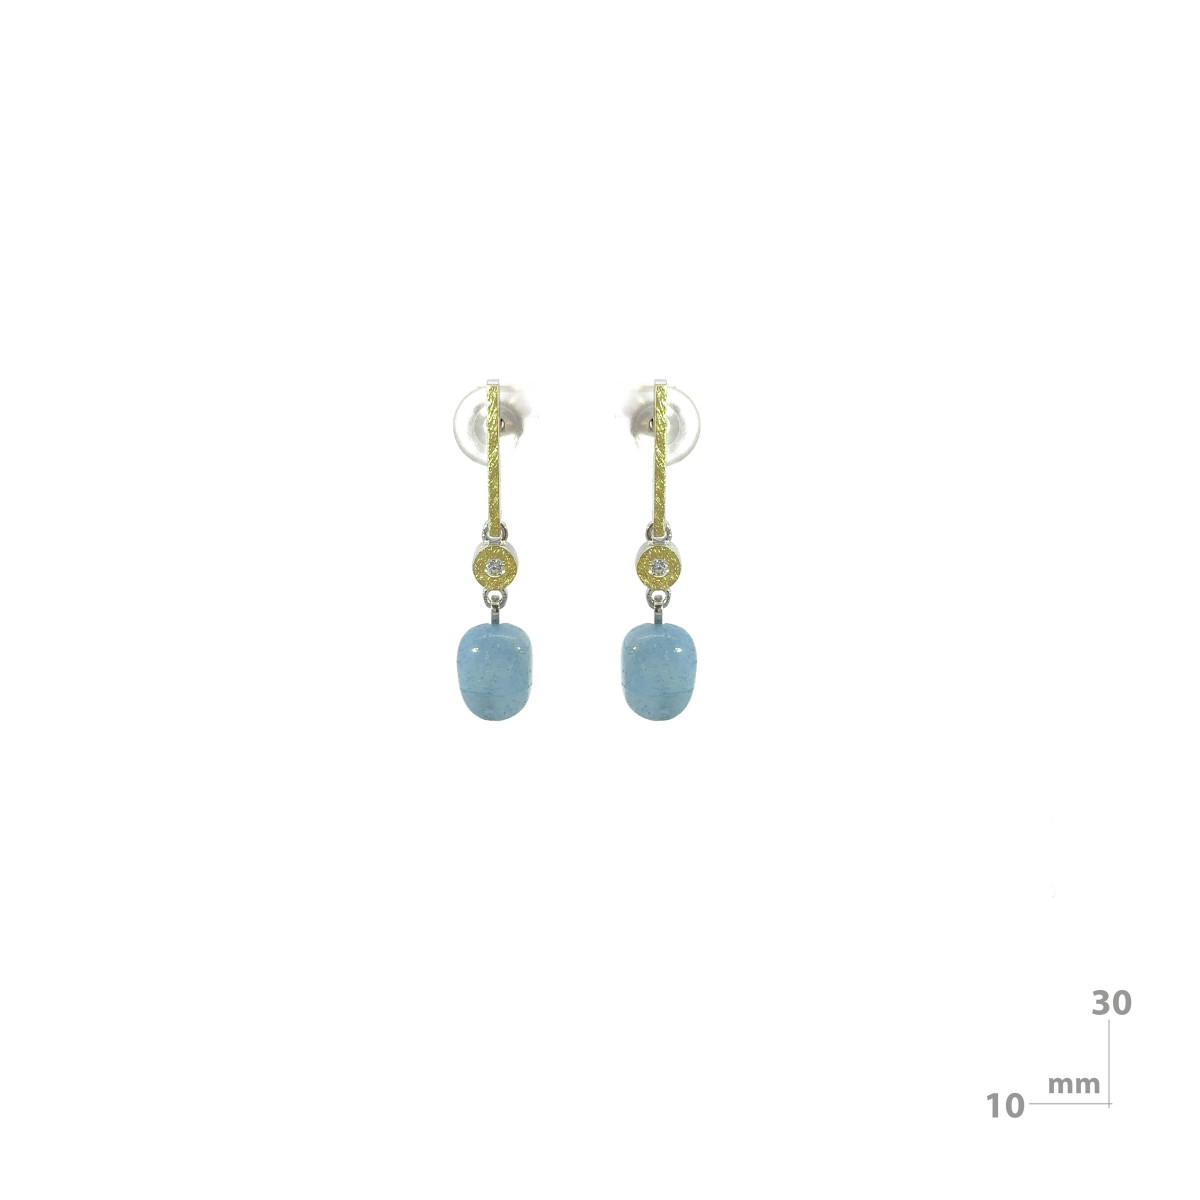 Earrings made of rhodium-plated silver, gold, brilliant and aquamarine